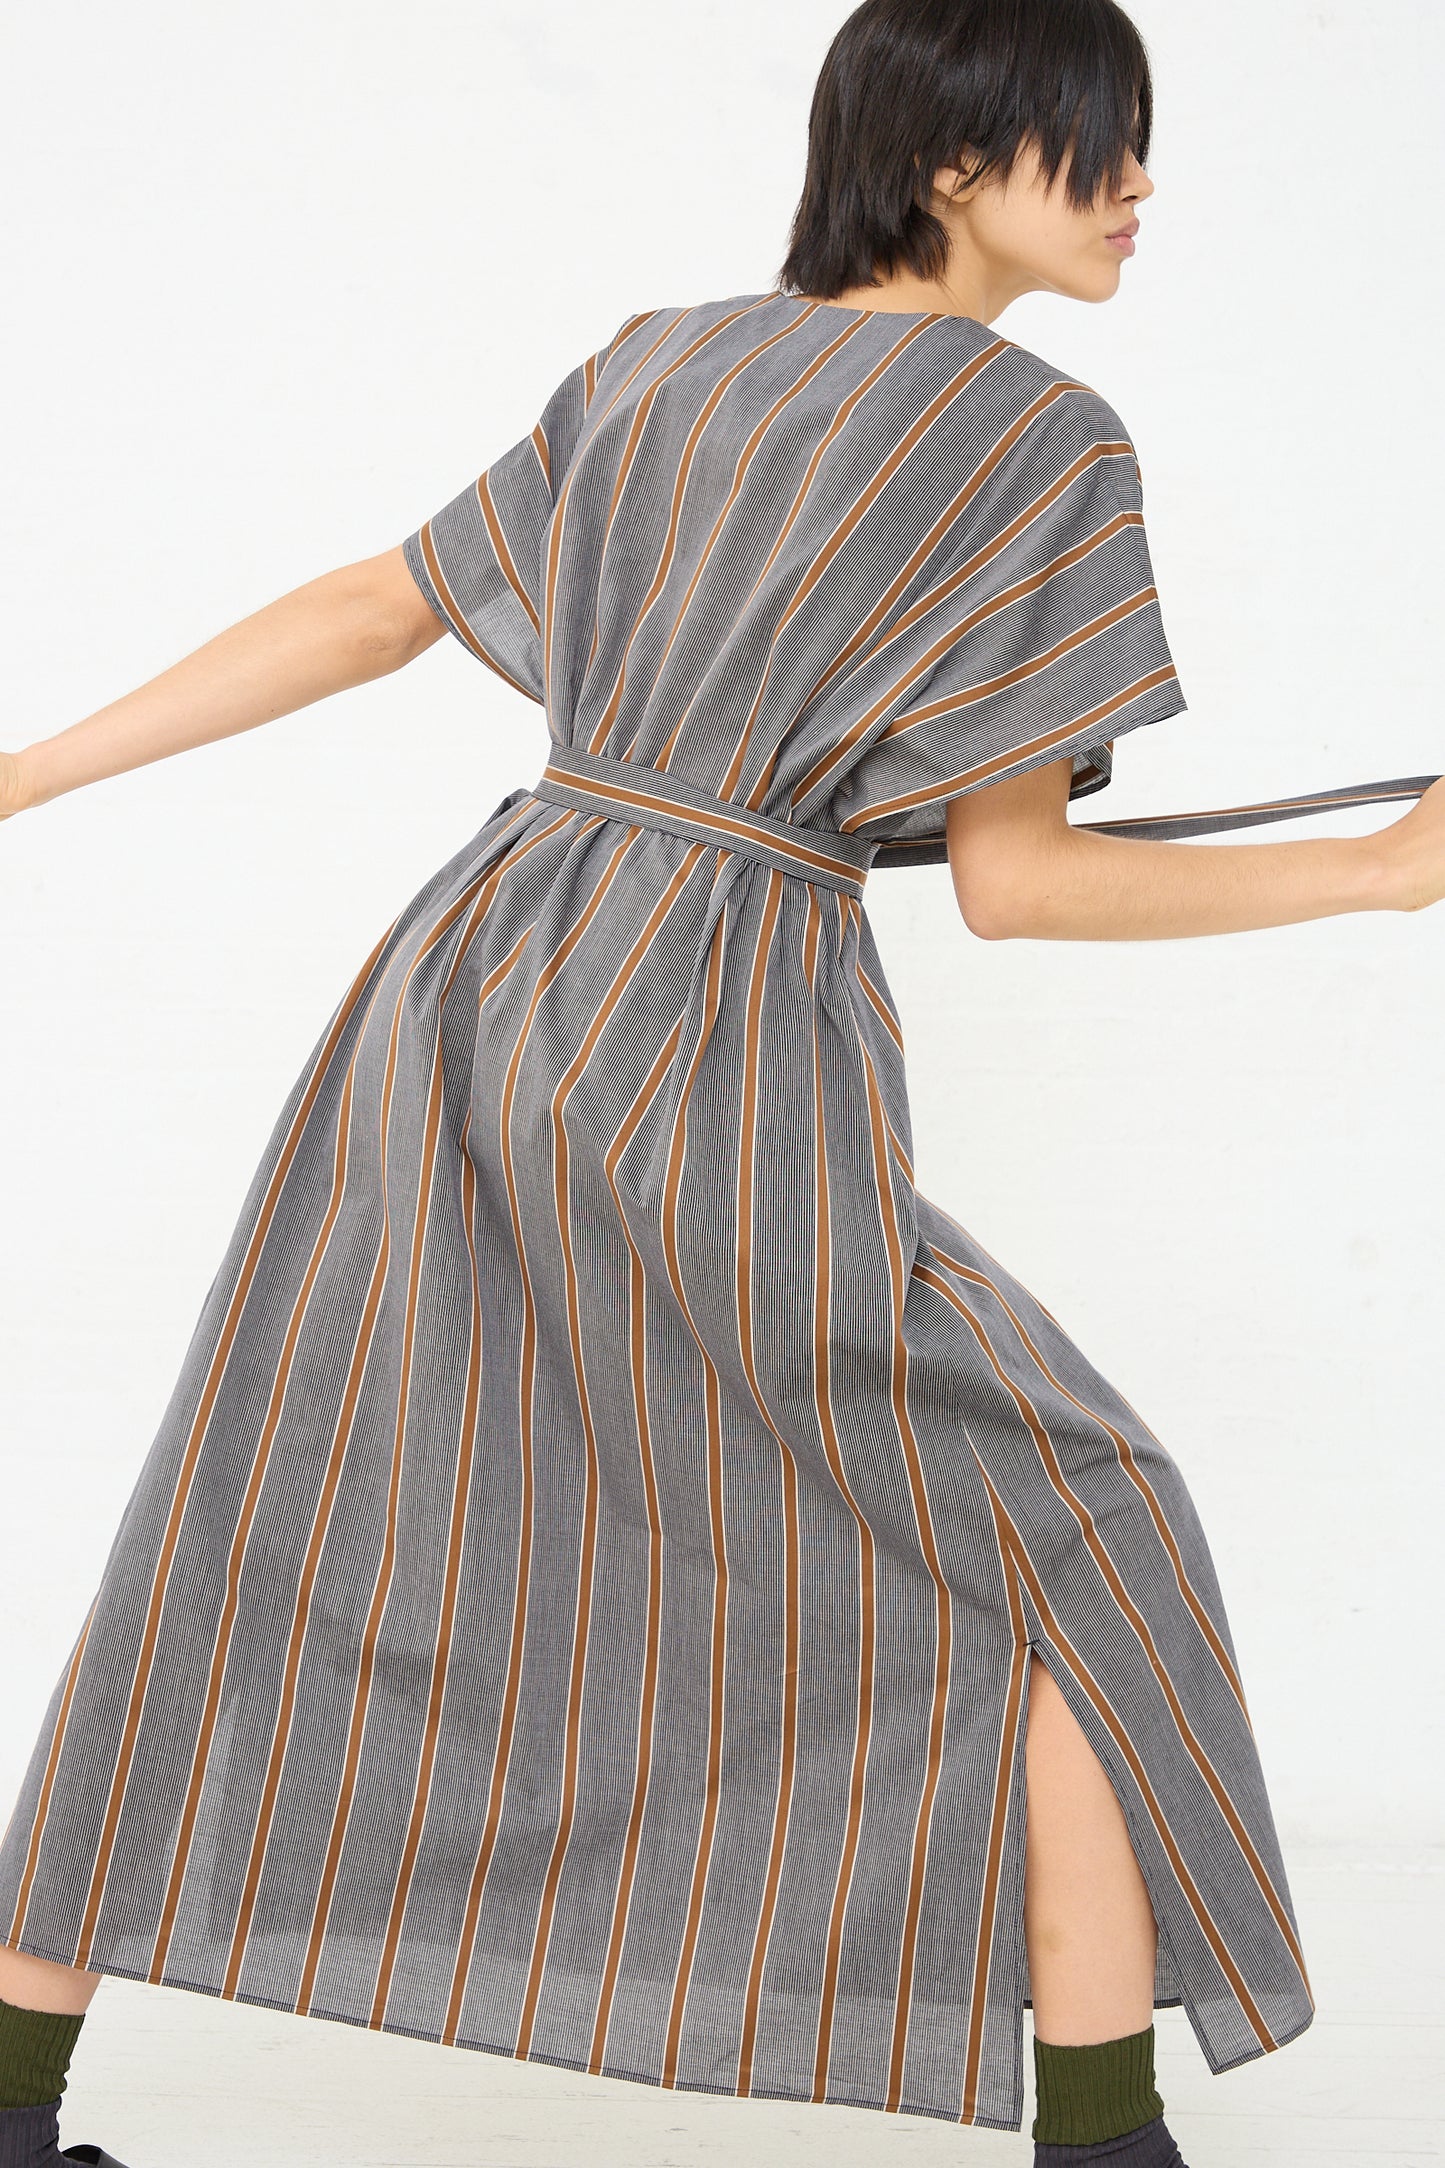 A model wearing an oversized Cristaseya Cotton Caftan in Striped Black and Noisette, made of lightweight Japanese cotton with a stripe pattern. Back view. Model is leaning to the side.